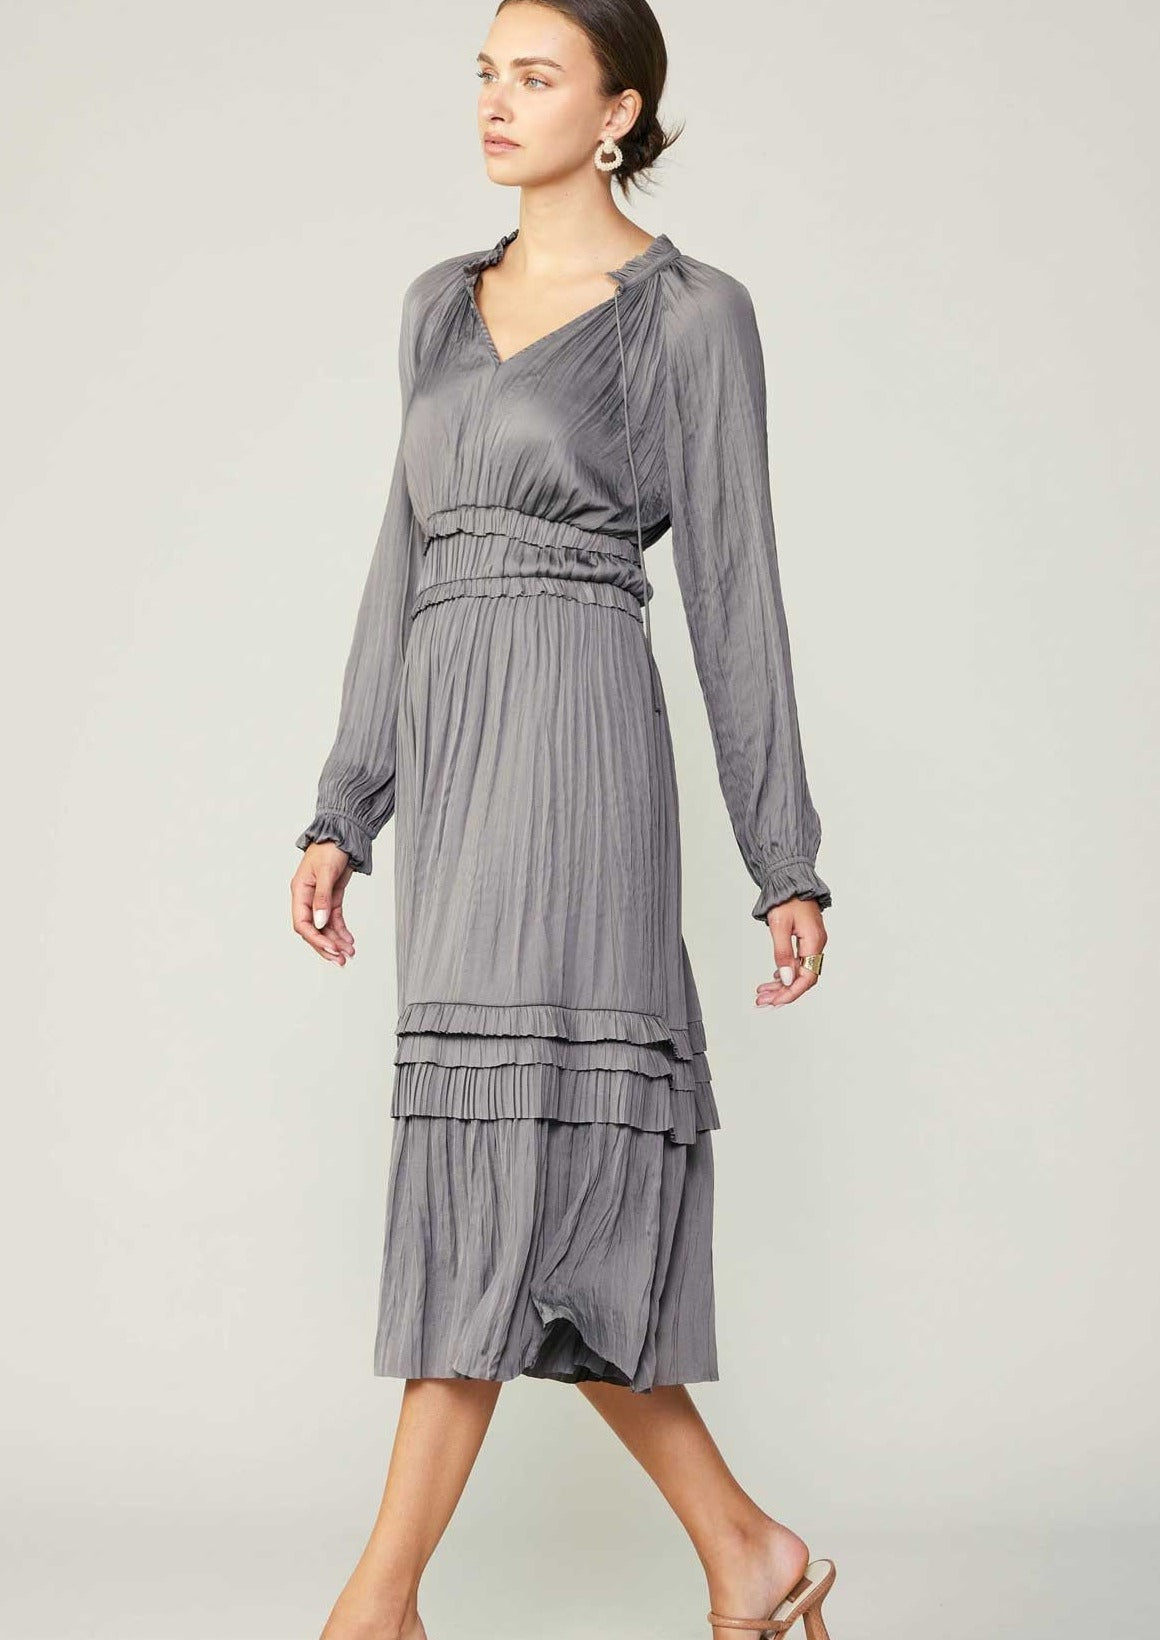 Grey long sleeve split neck long dress with ruffle detail on neck and waist and hem. 